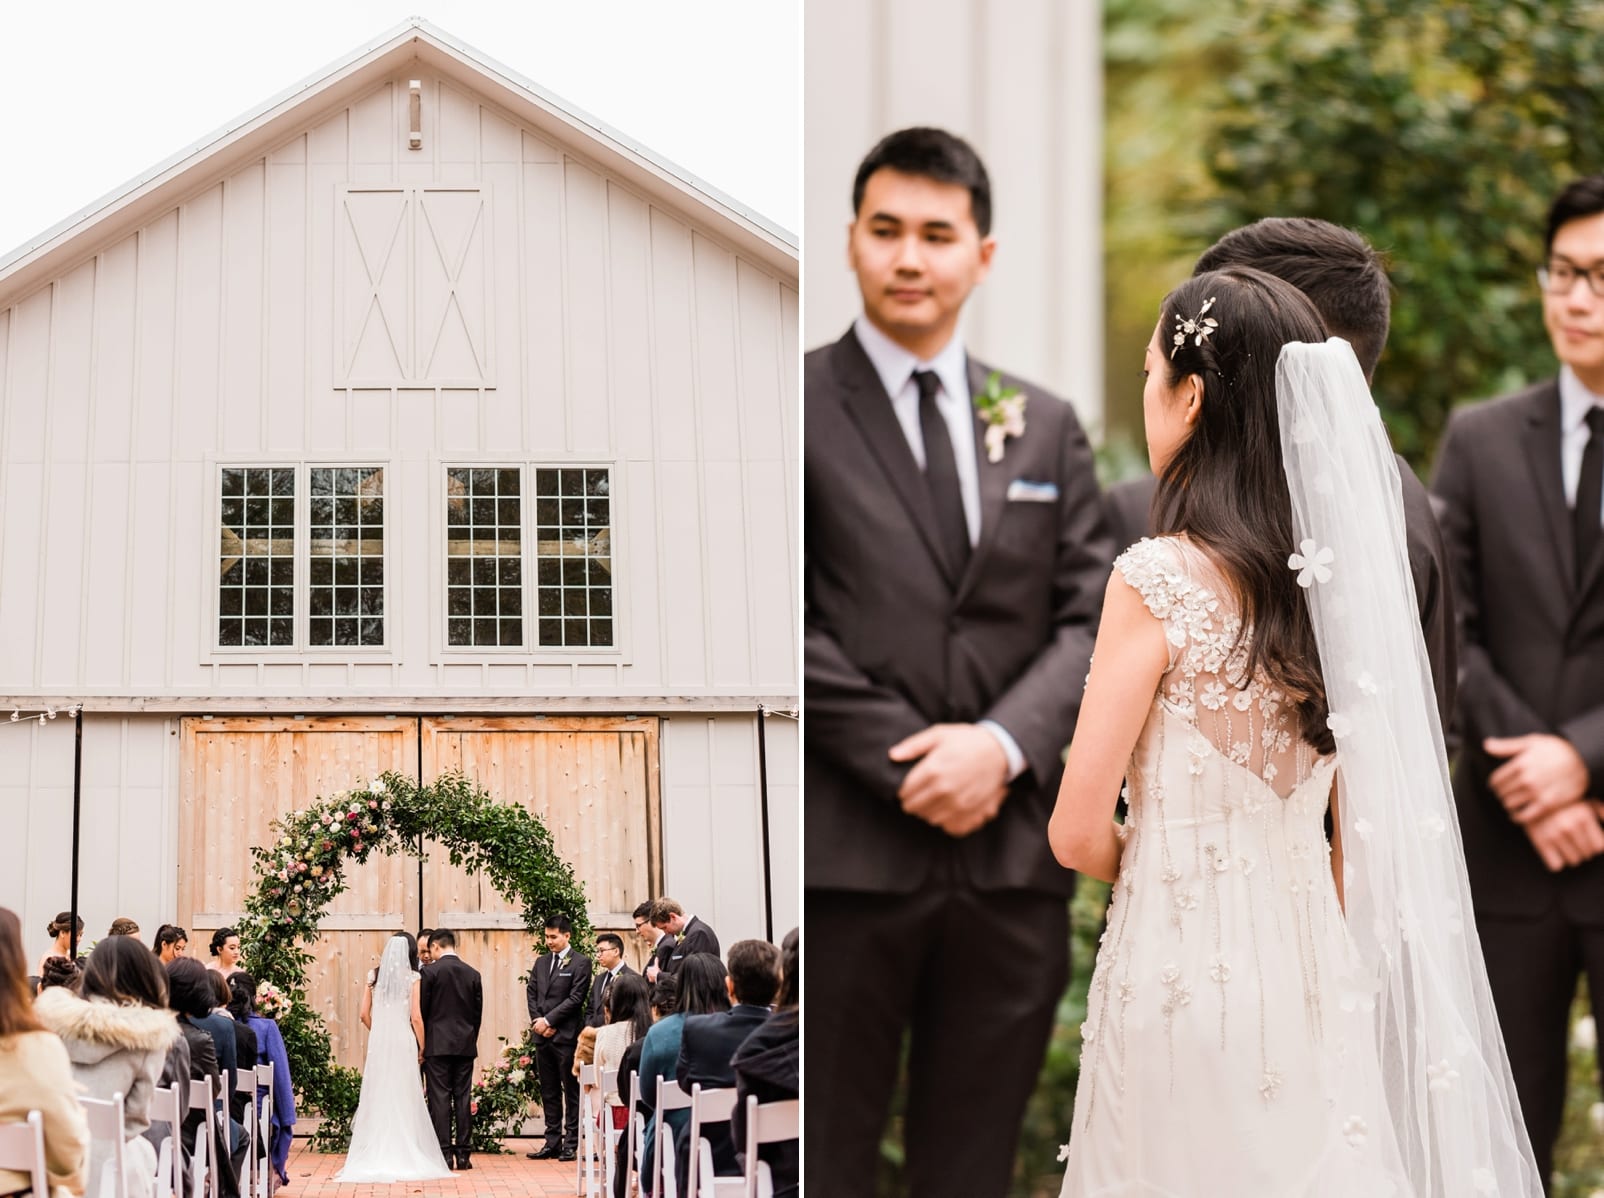 Barn of Chapel Hill bride and groom exchanging vows photo